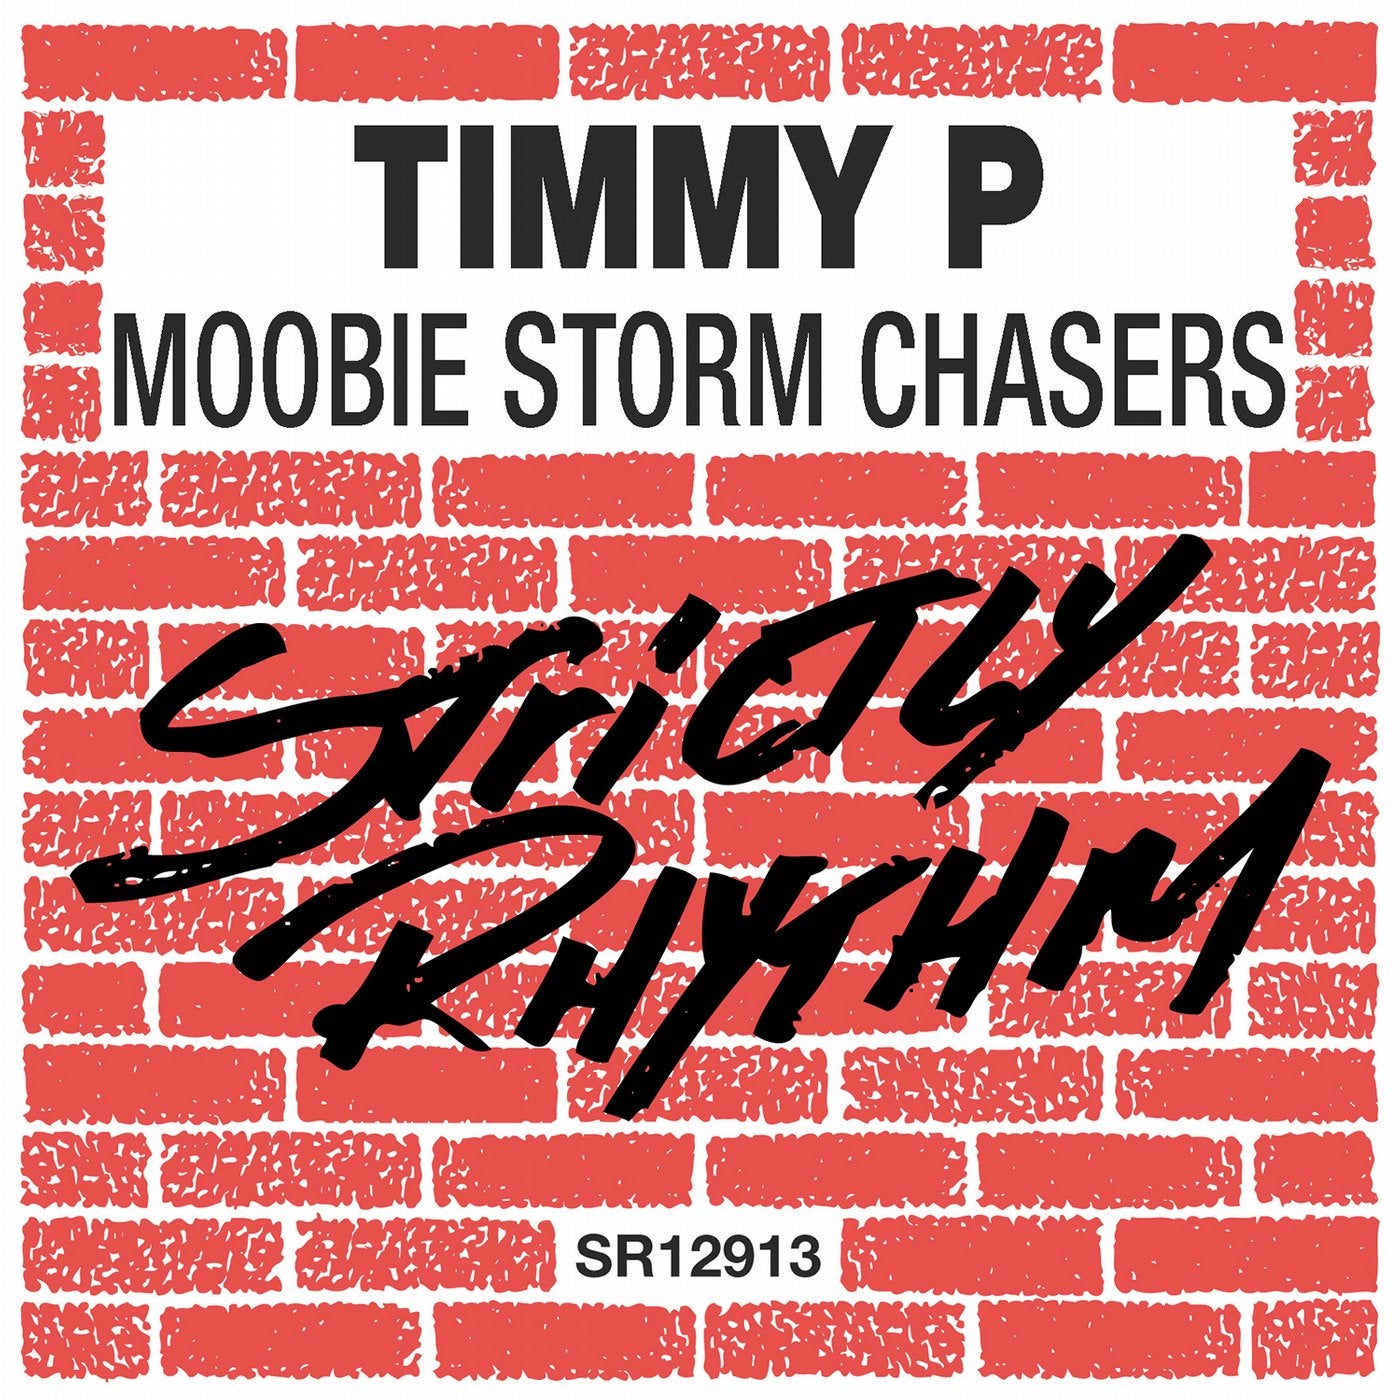 Moobie Storm Chasers